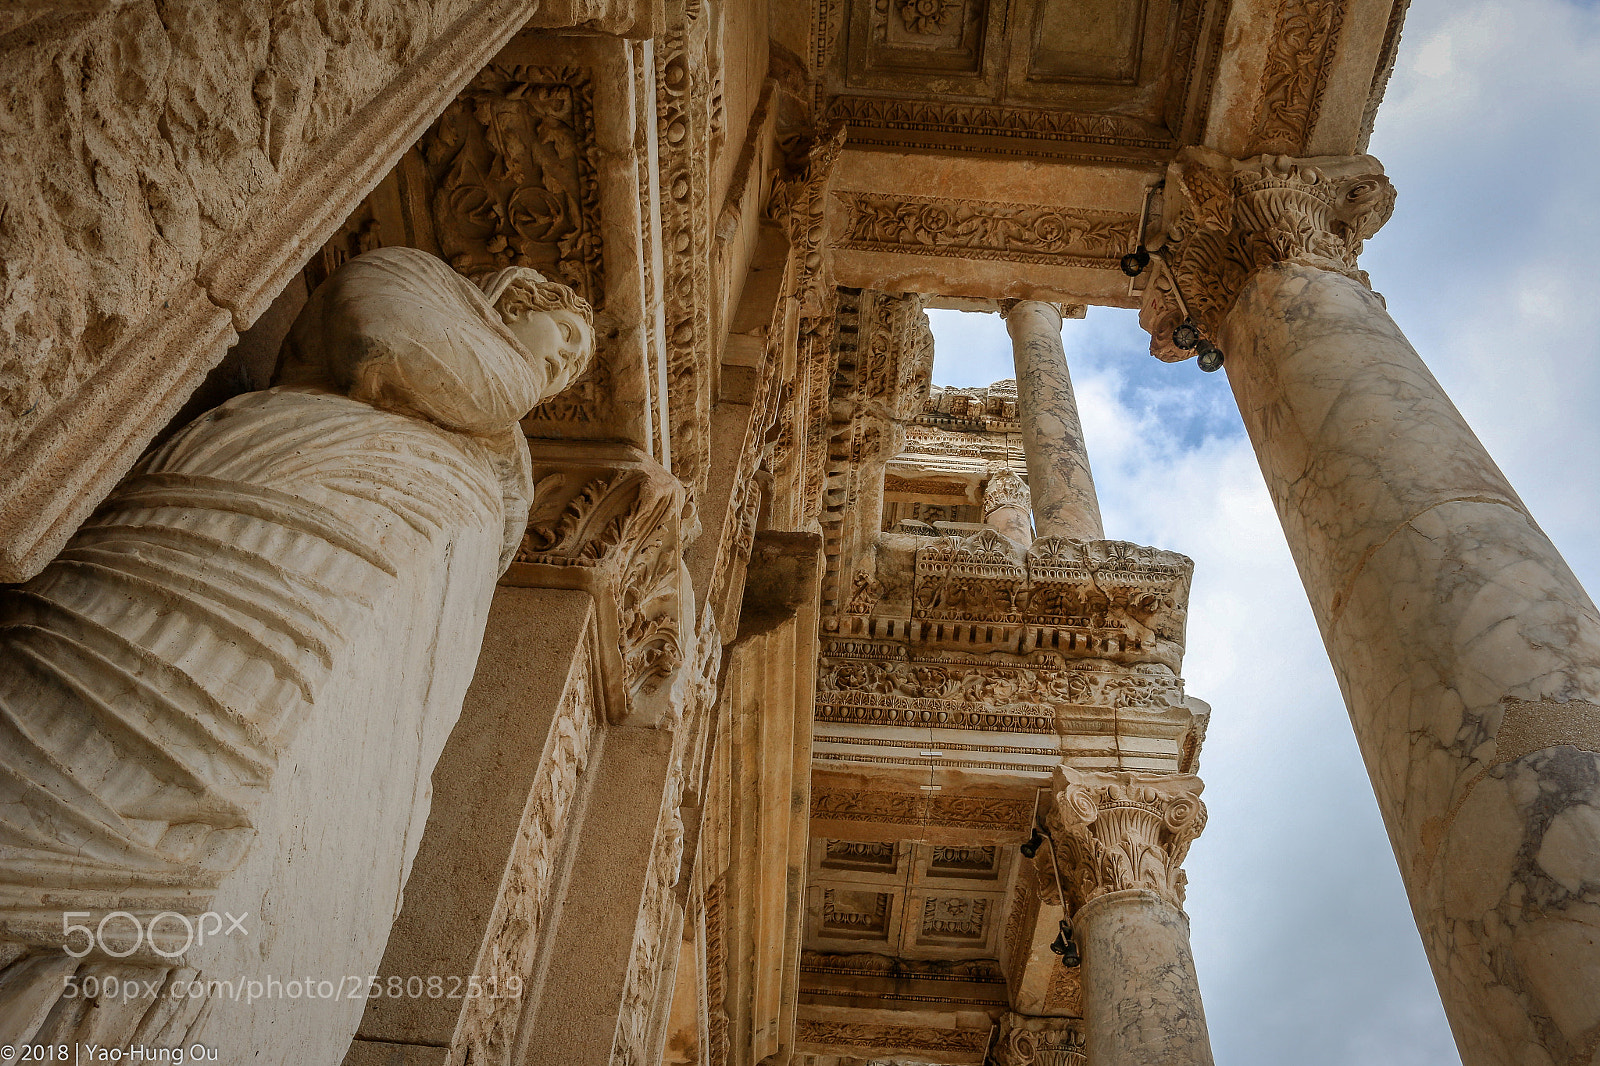 Canon EOS 70D sample photo. Library of celsus, ephesus photography